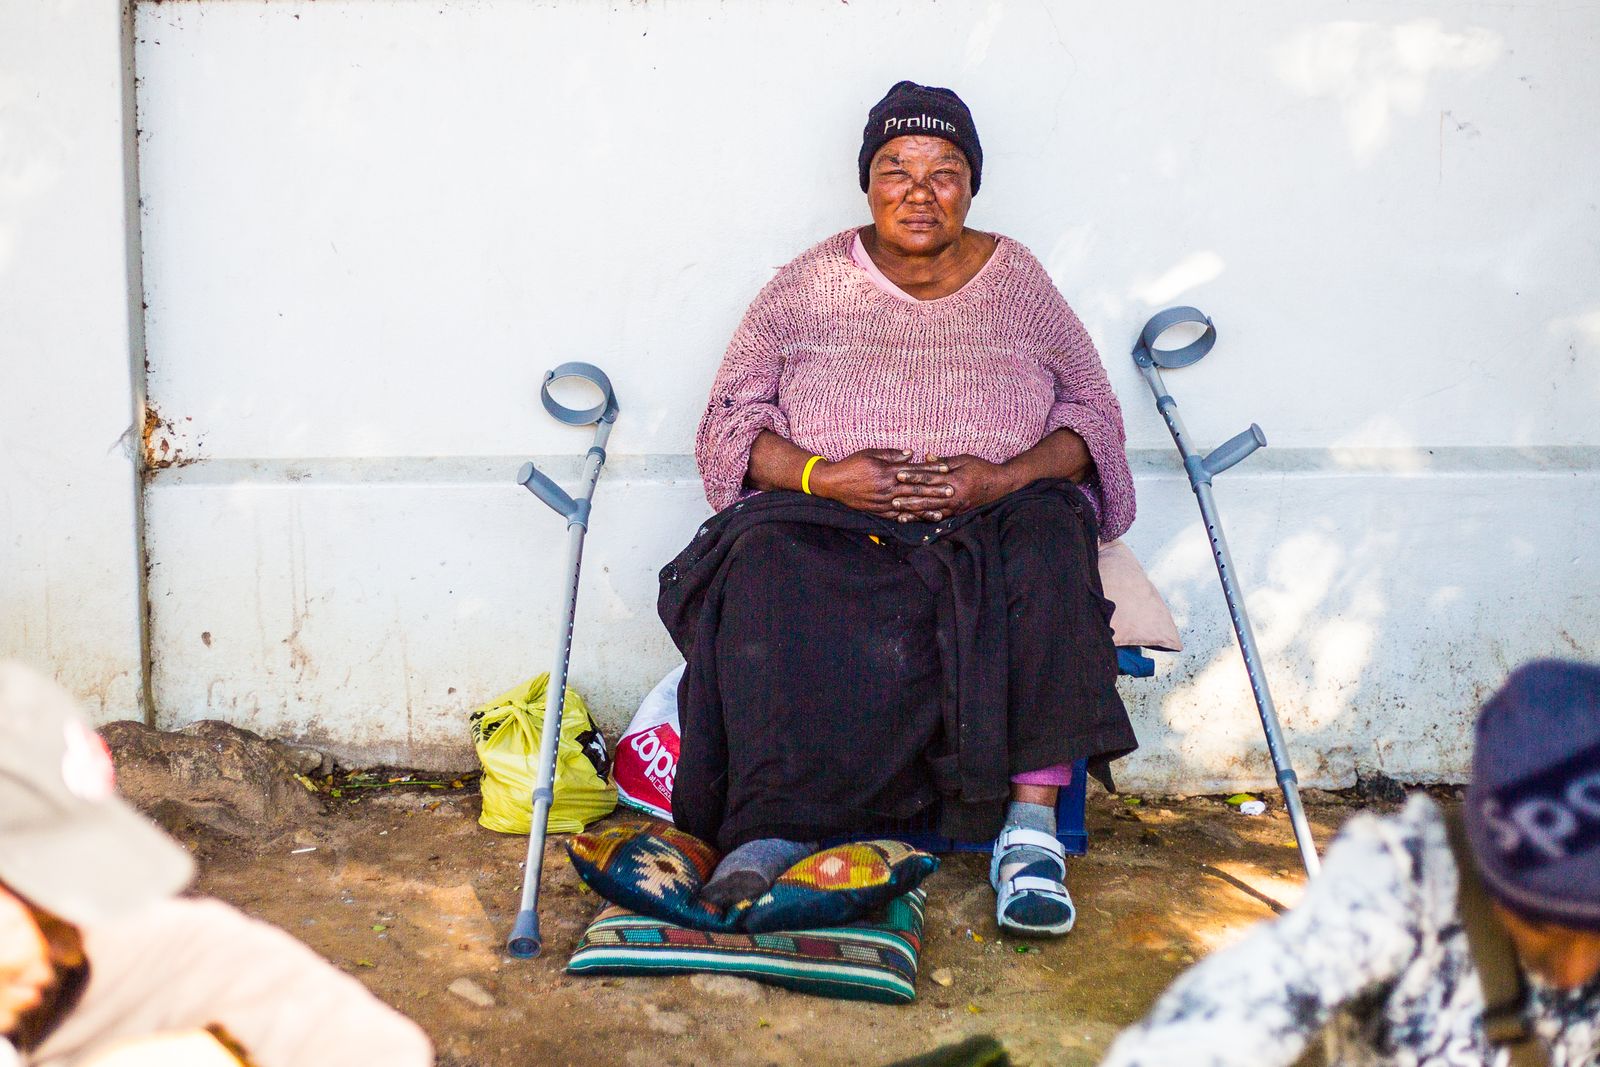 © Marzahn Botha - Image from the The Homeless of Cape Town: Angels and gardens to "grow people". photography project